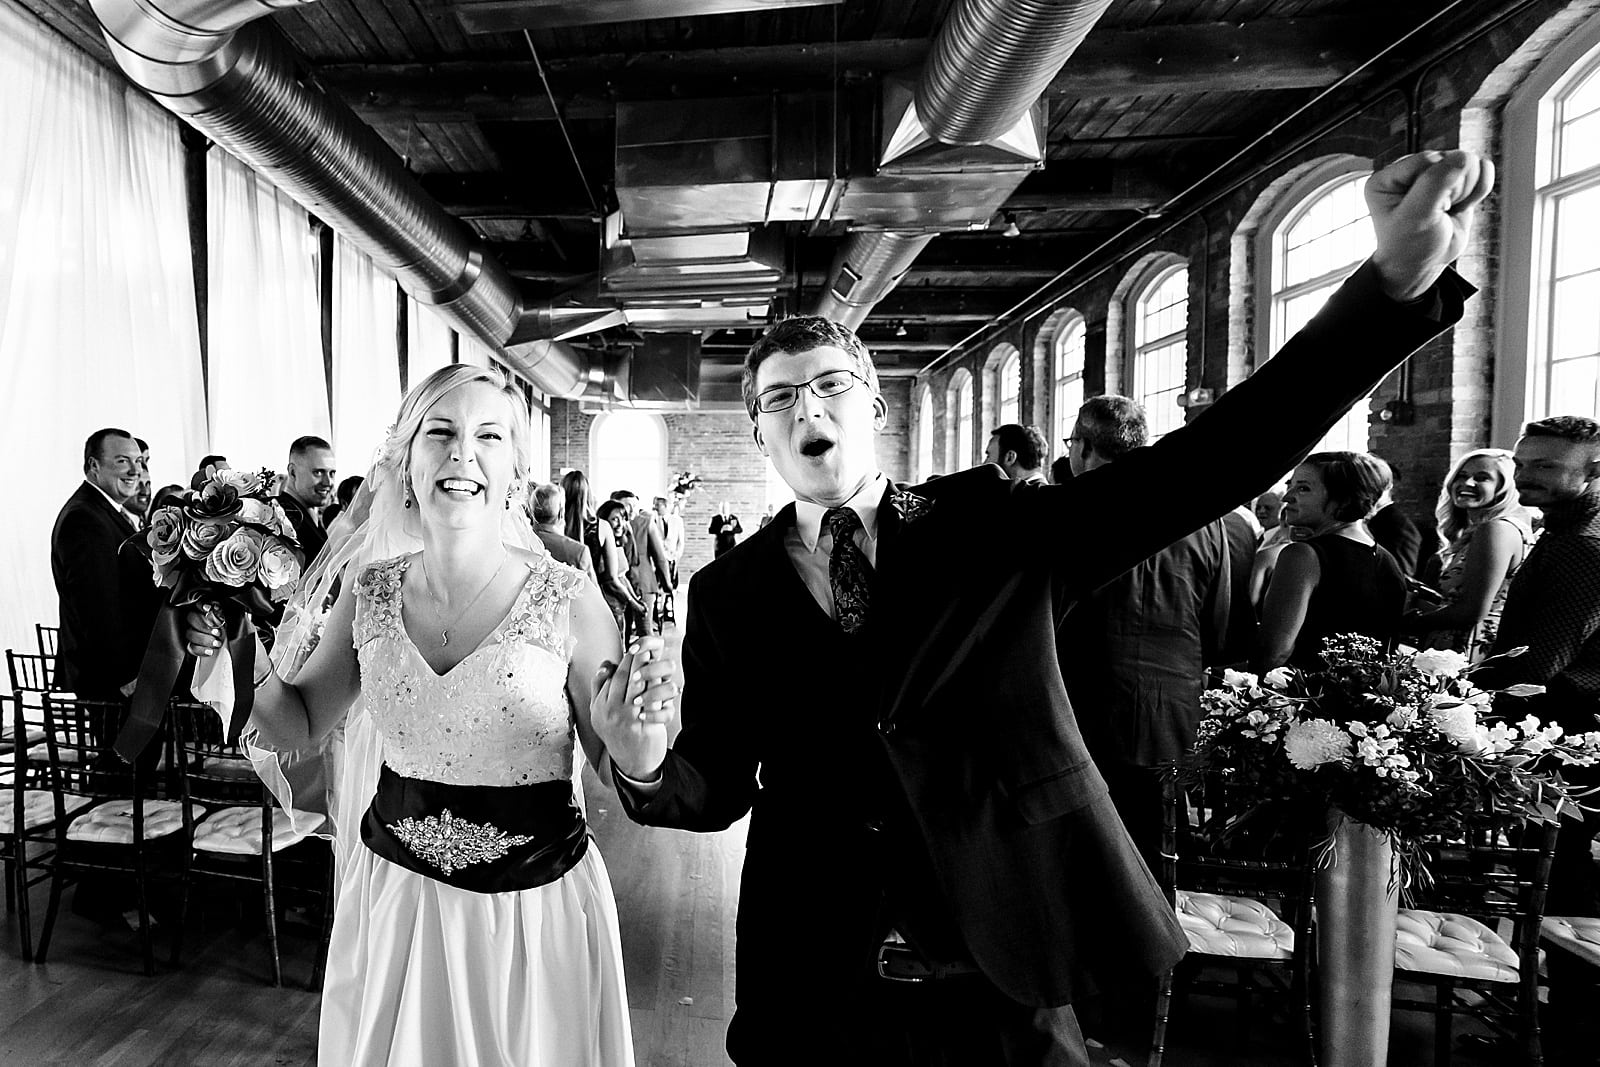 This couple is ecstatic to be married